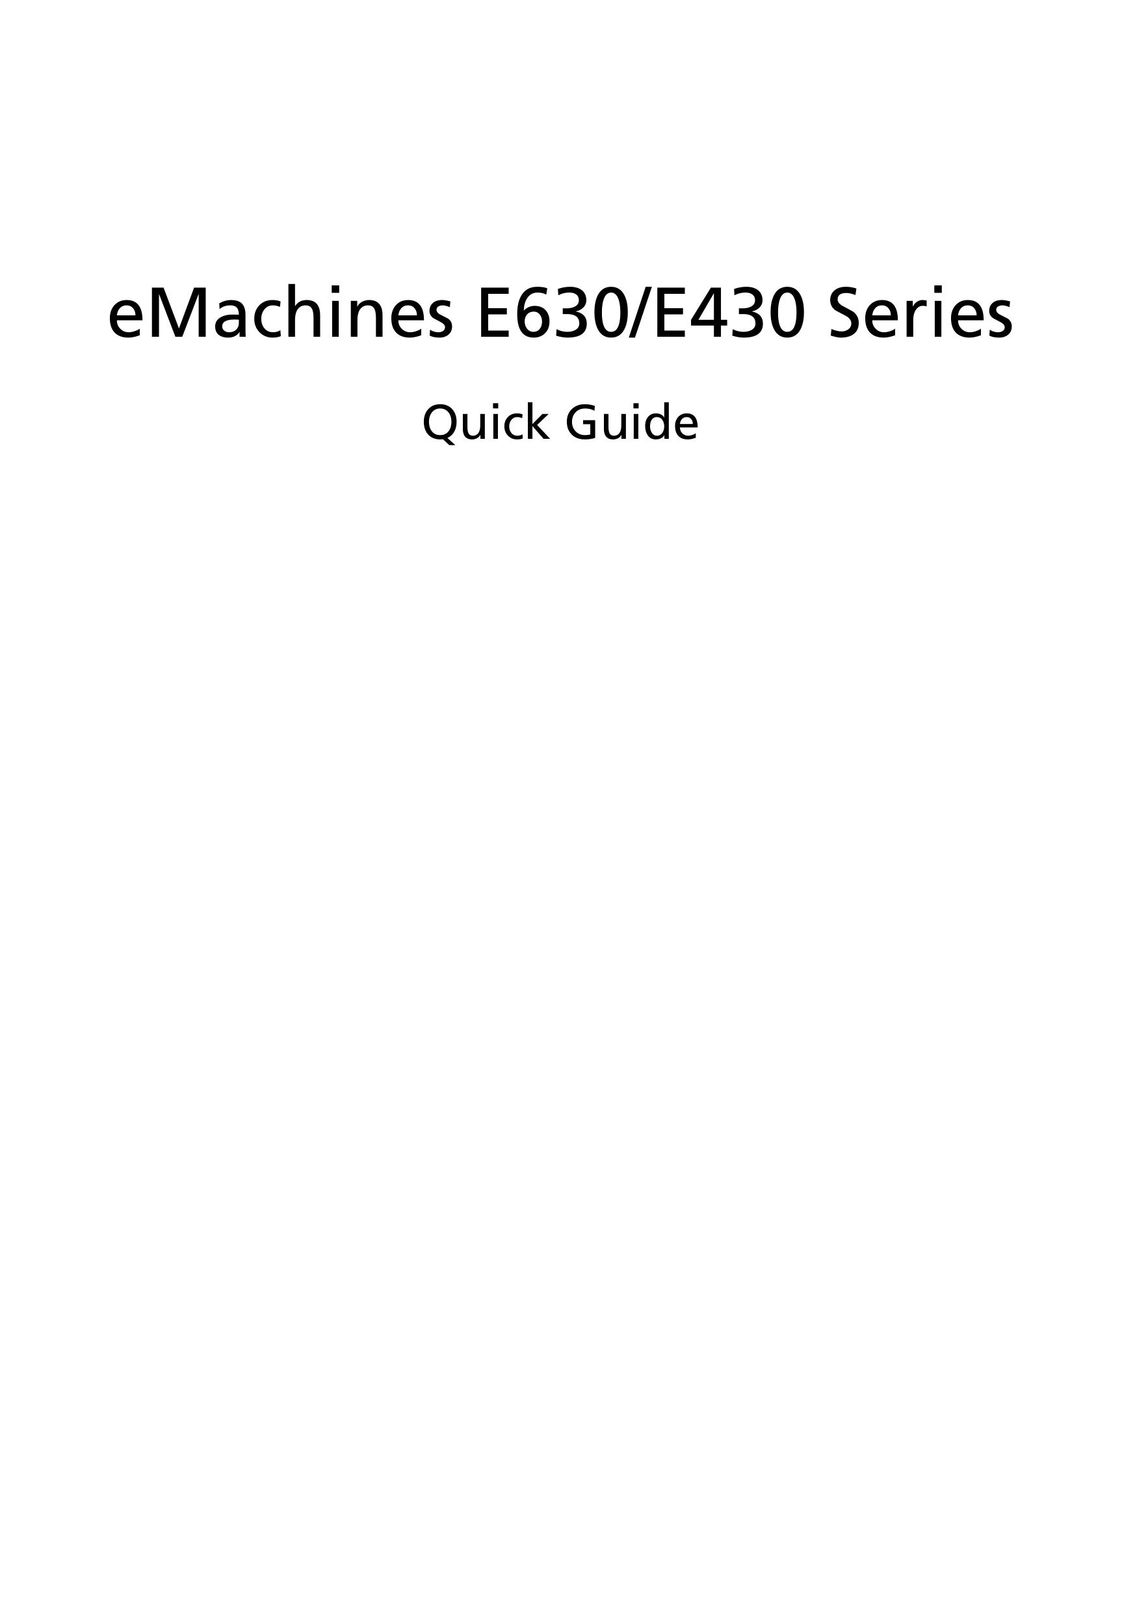 eMachines E630 Series Laptop User Manual